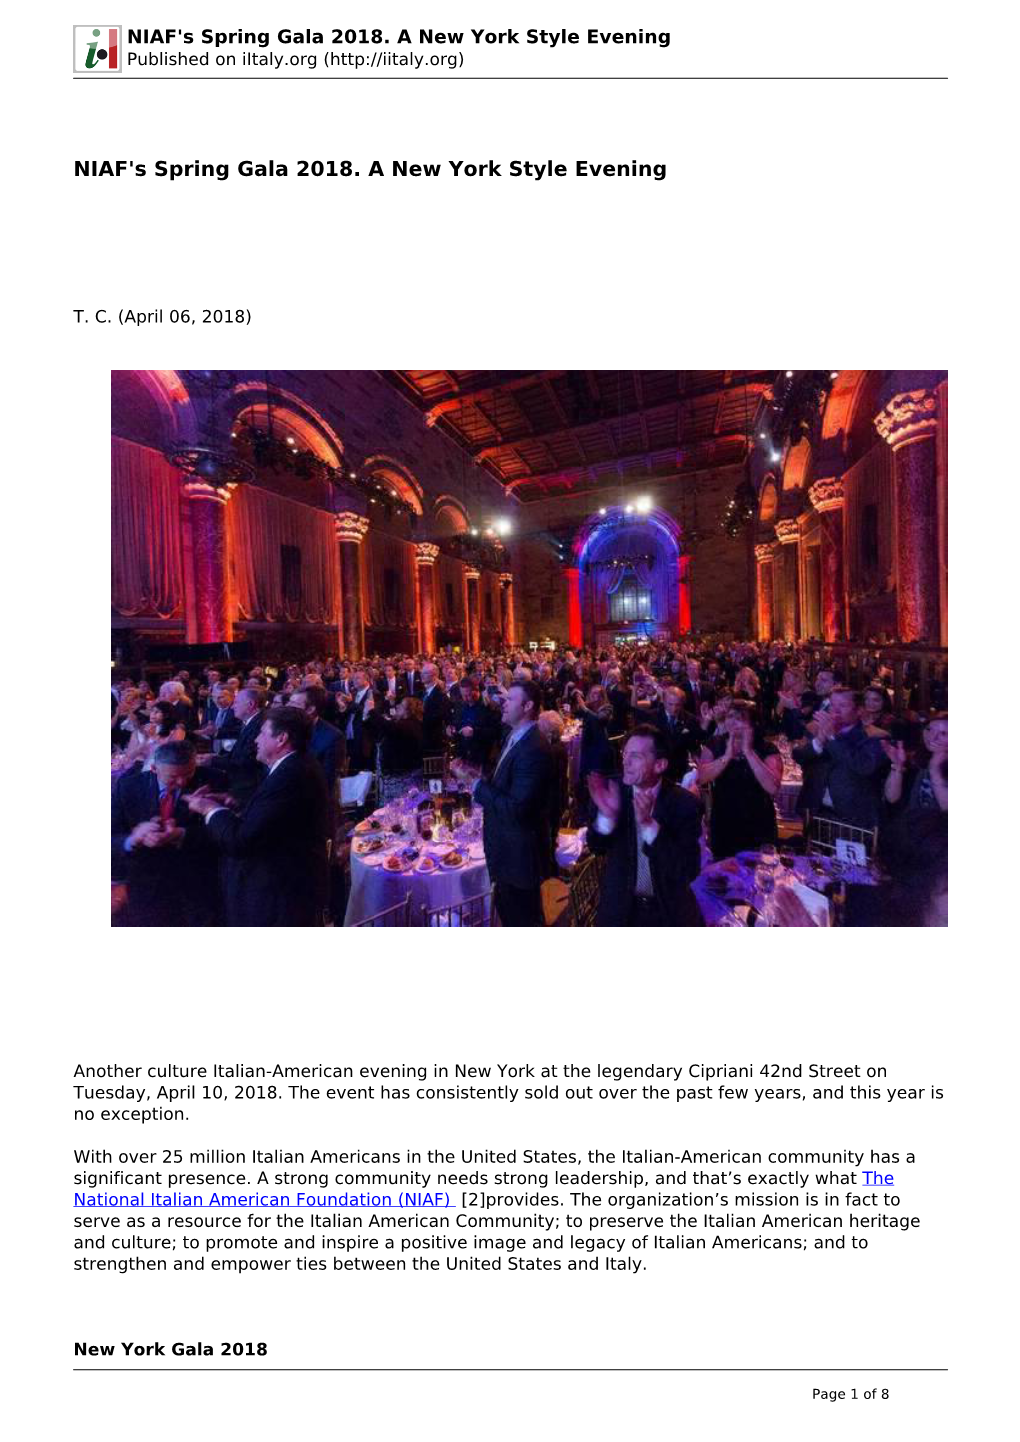 NIAF's Spring Gala 2018. a New York Style Evening Published on Iitaly.Org (